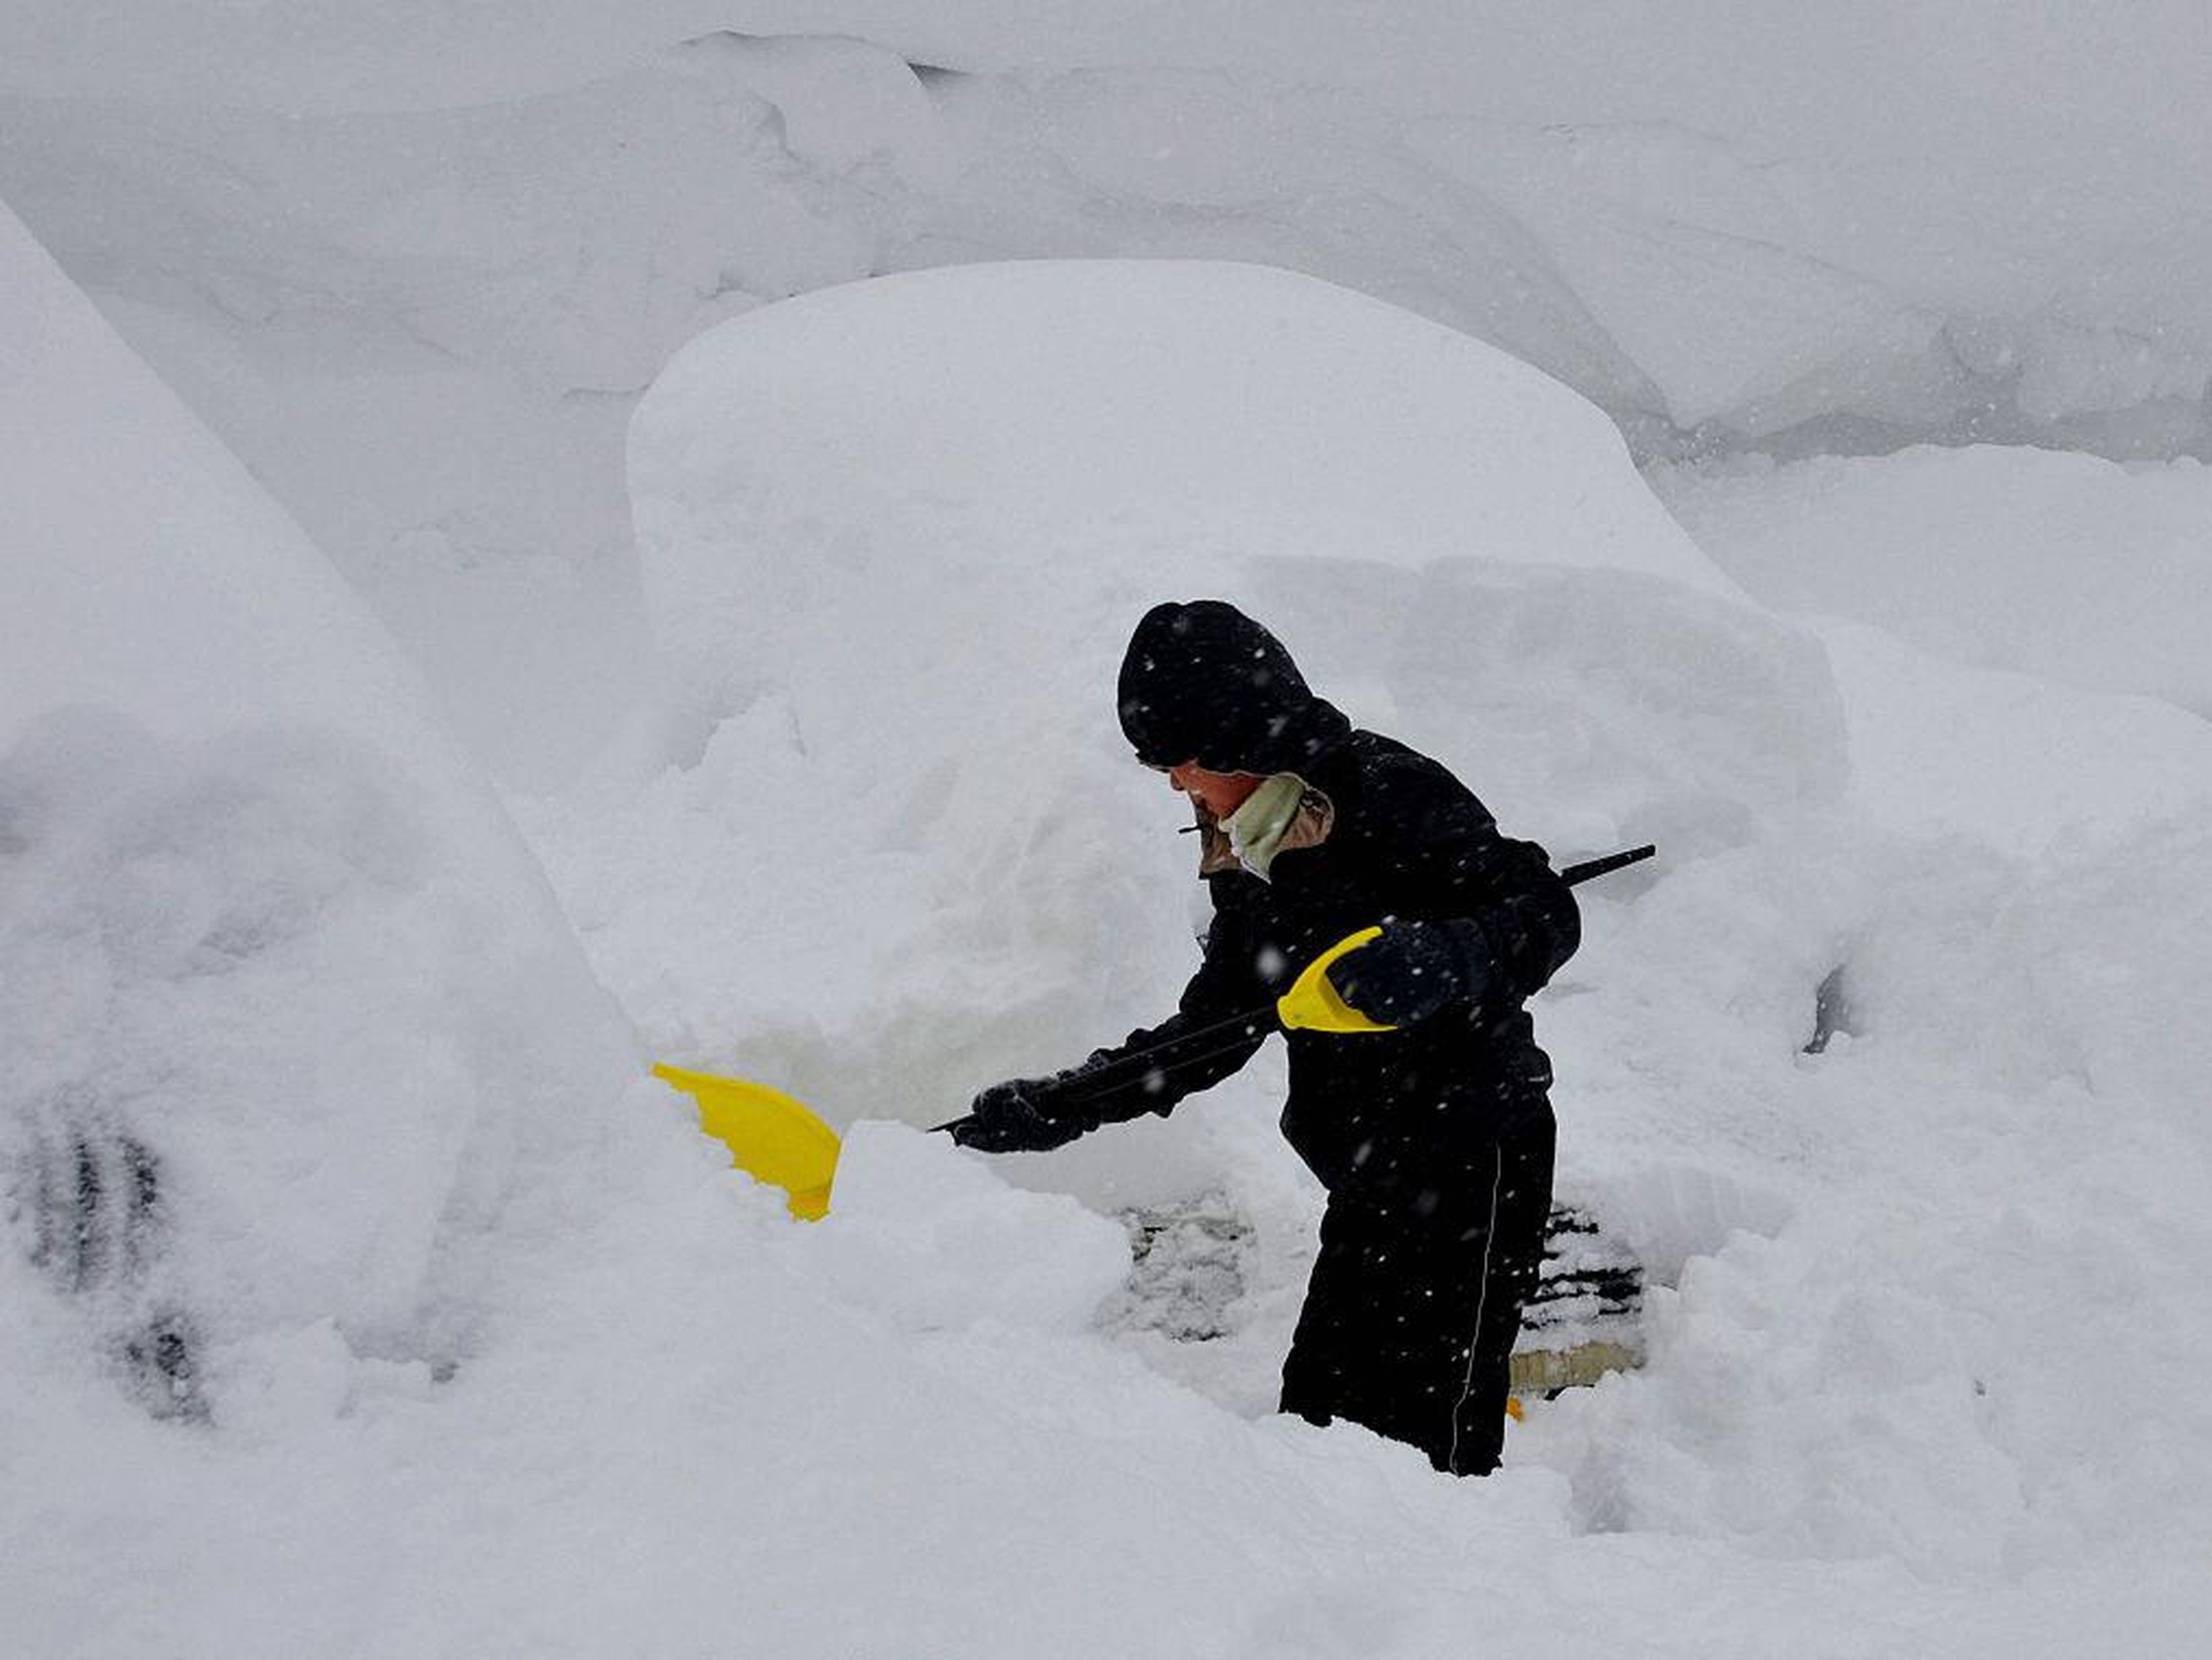 Shoveling snow can feel like a never-ending cycle in Aomori. "Snow shoveling morning, noon, and night is only to be expected," reads Aomori Unearthed, a magazine produced by the city. "As much as I shovel, I can't keep up," a